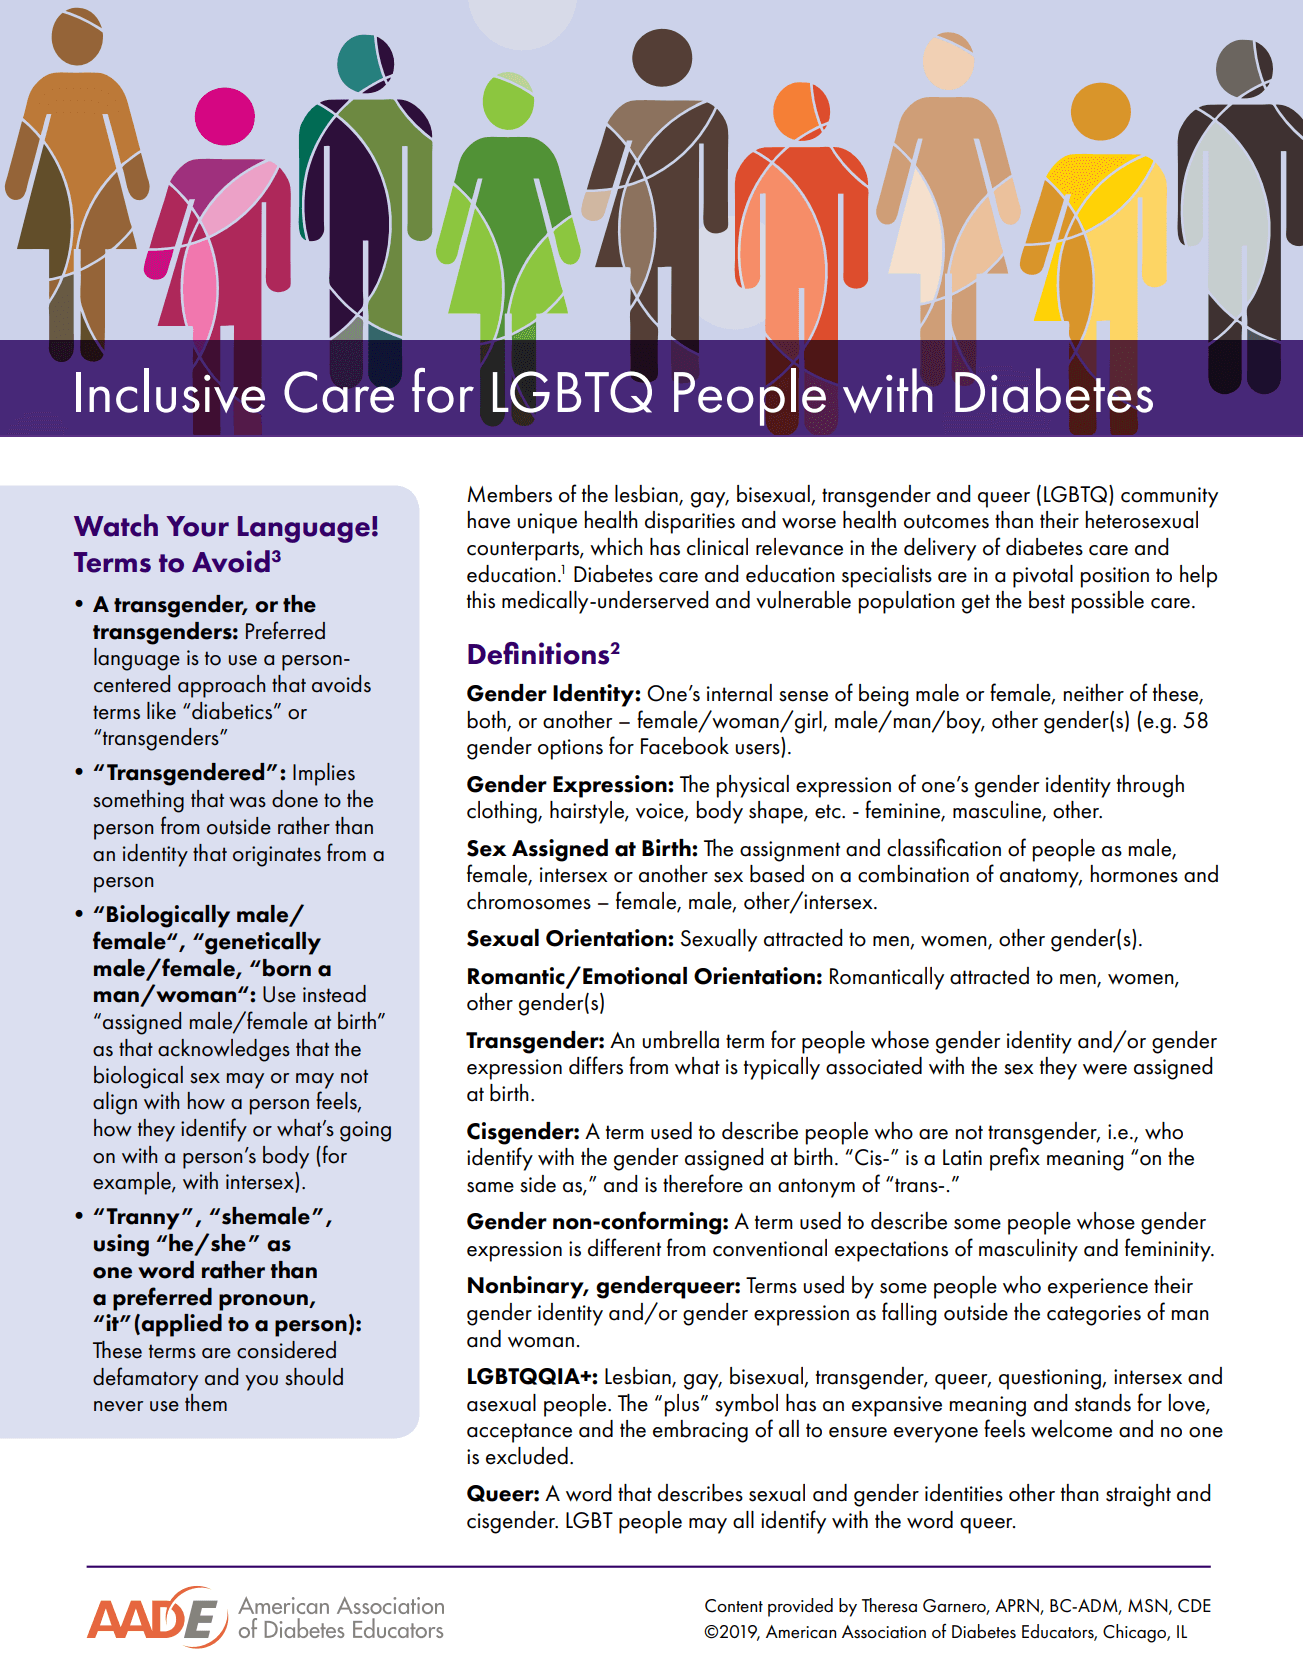 Inclusive Care for LGBTQ People with Diabetes